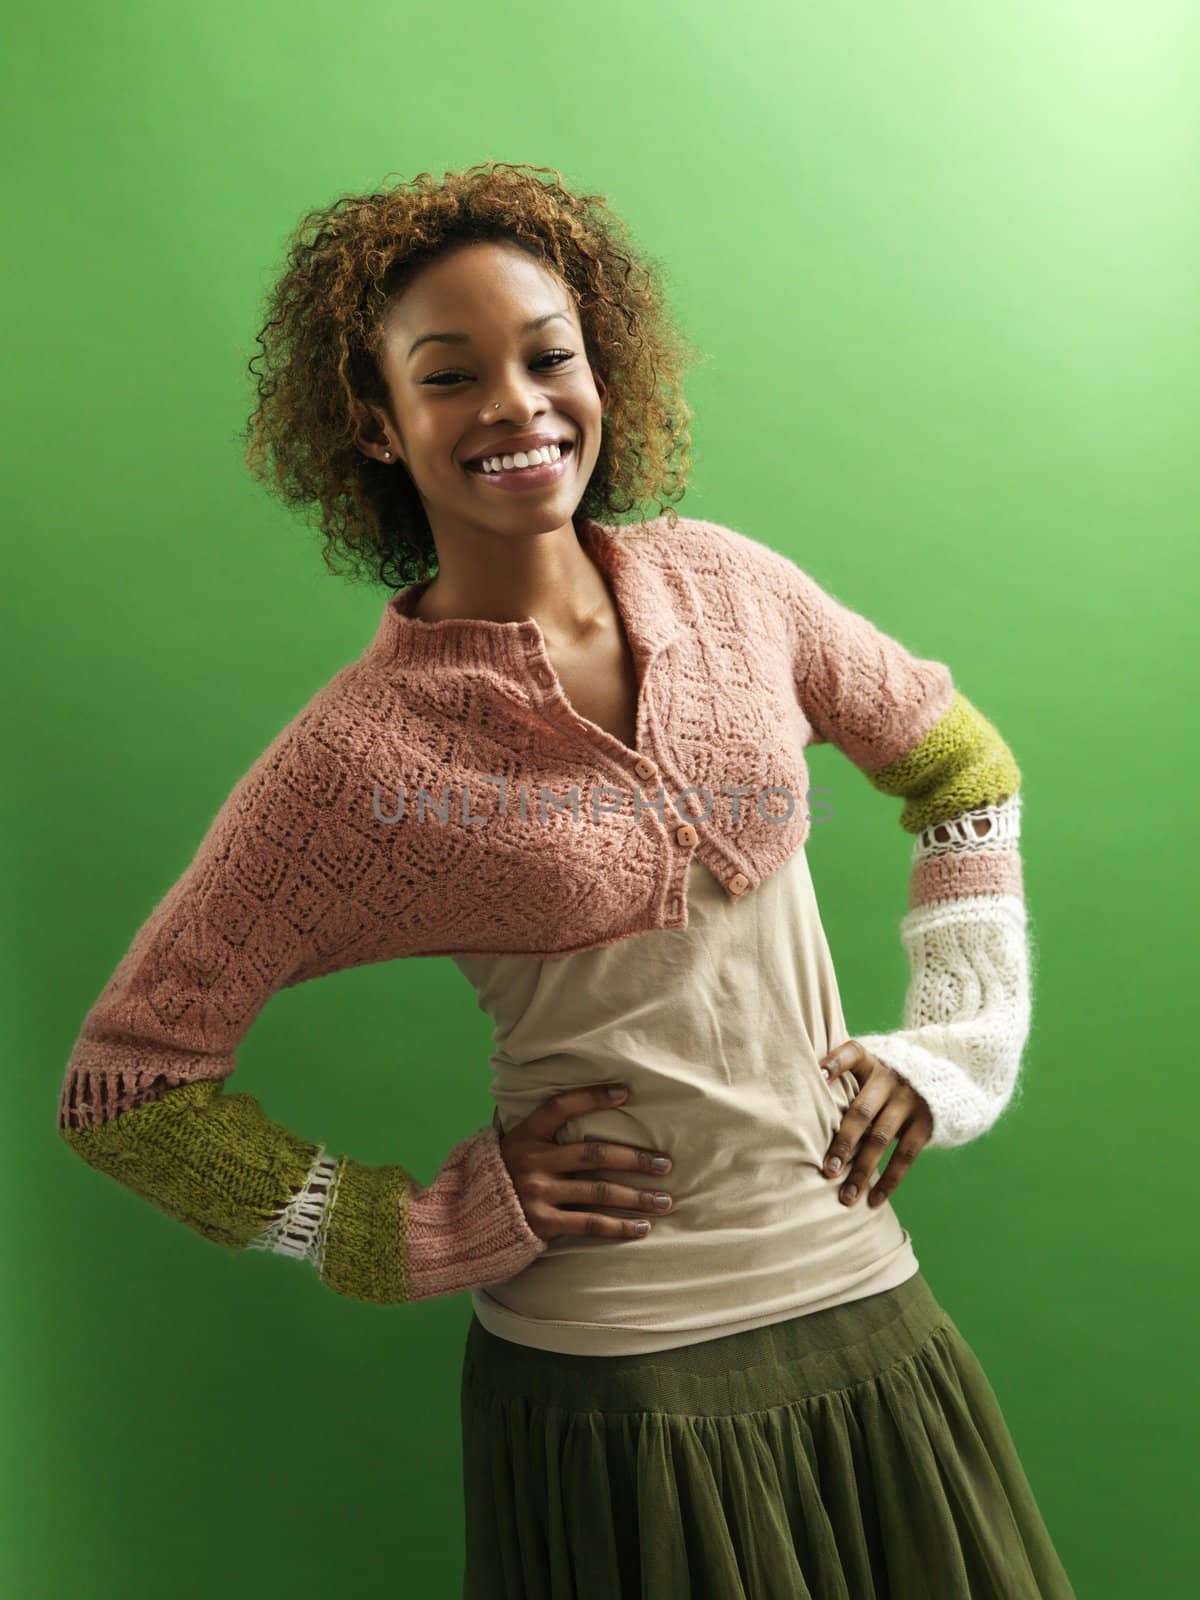 Portrait of pretty young woman standing against green background with hands on hips smiling.